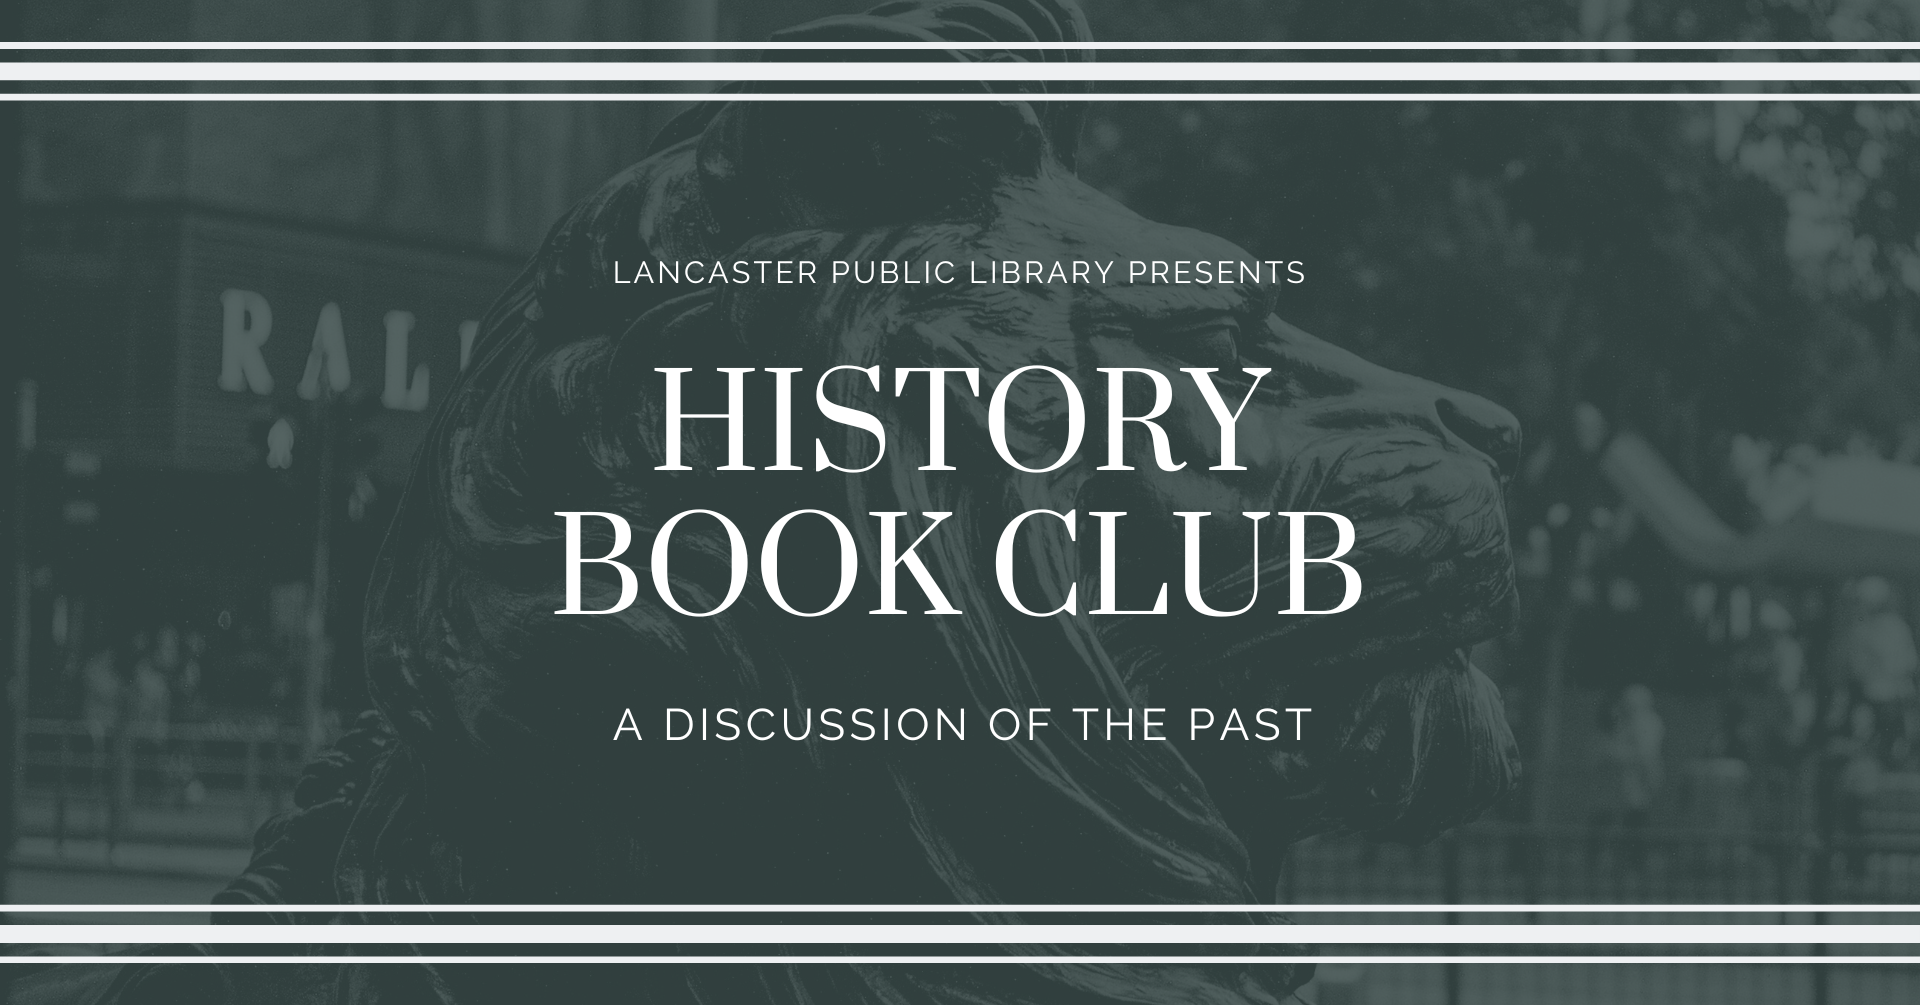 LPL presents History Book Club over lion monument